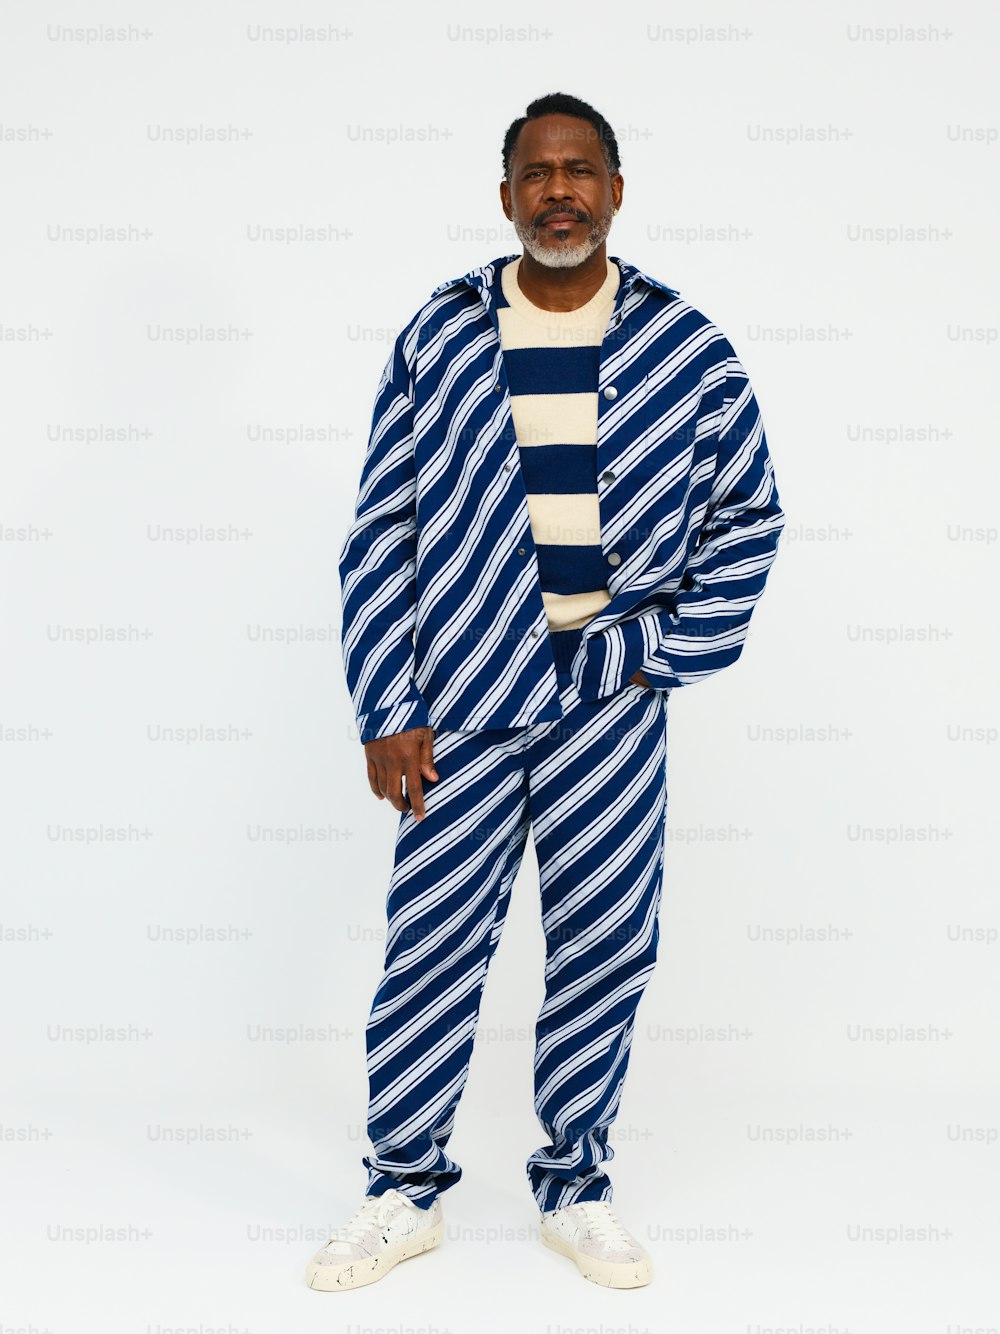 a man in a blue and white striped suit